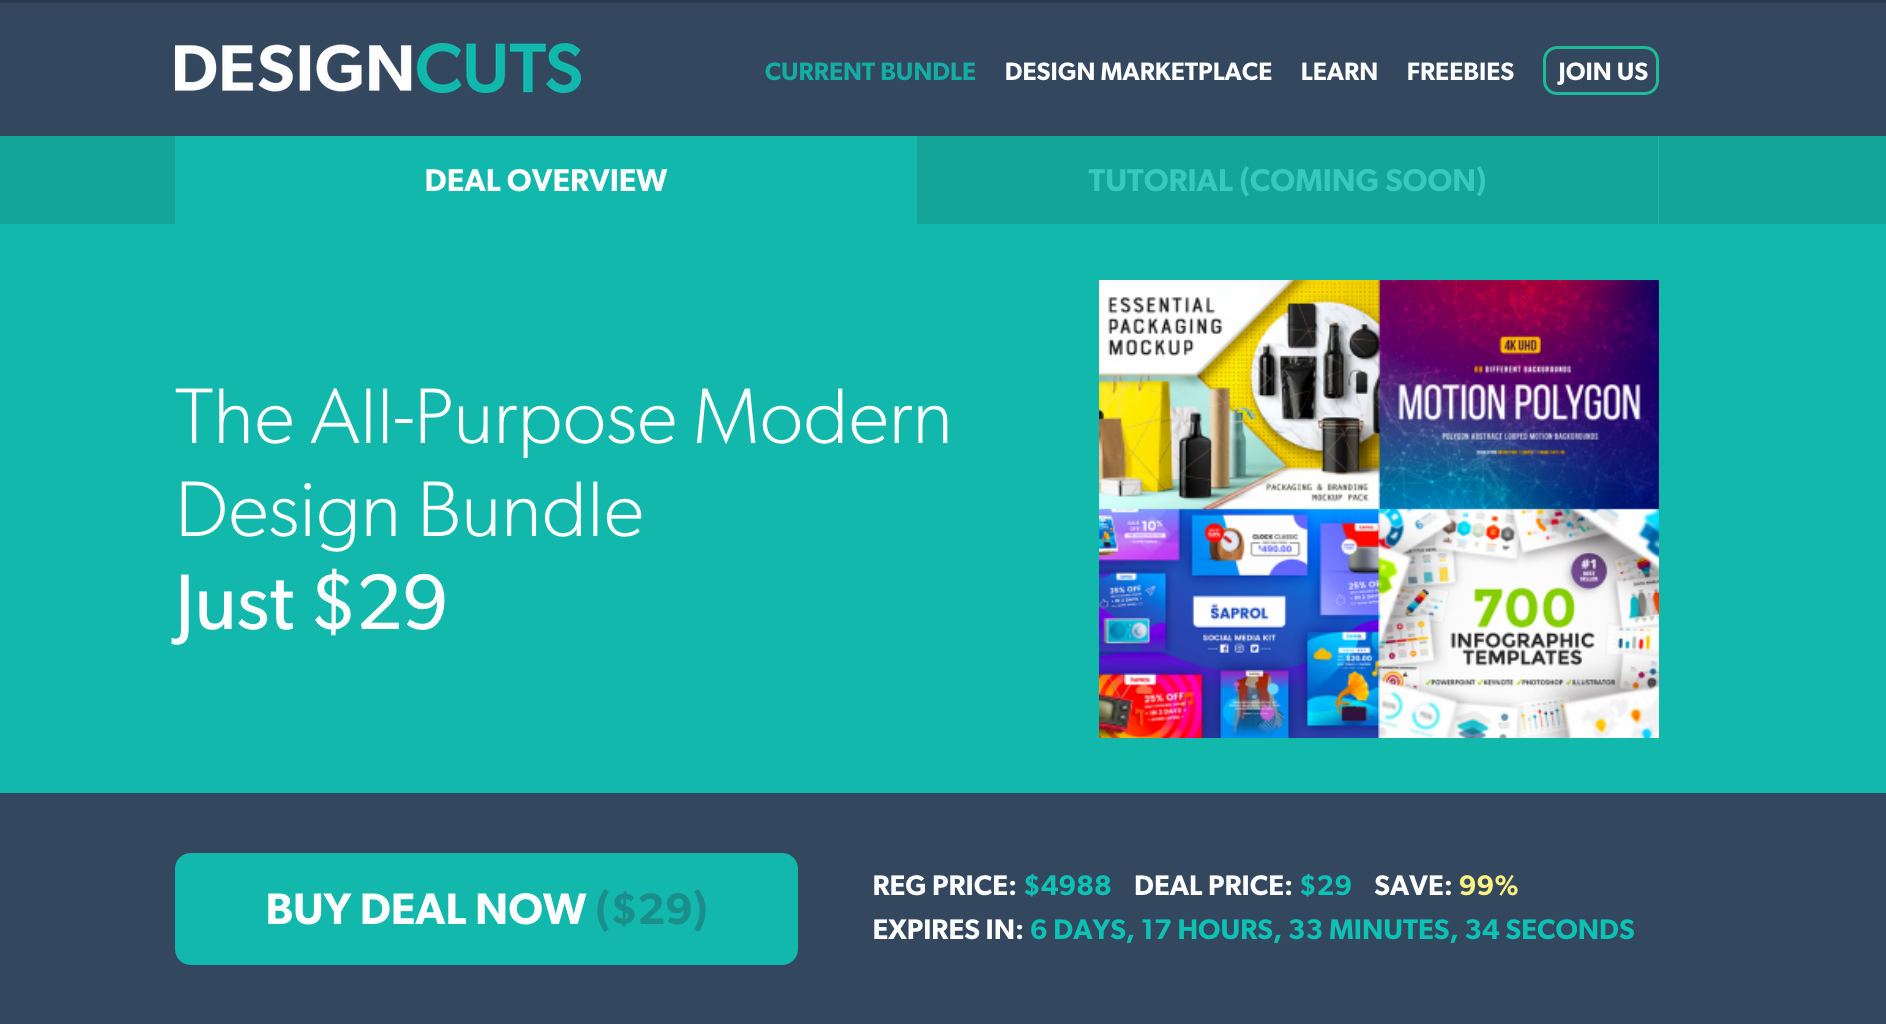 10 best graphic design tools for May | Creative Bloq